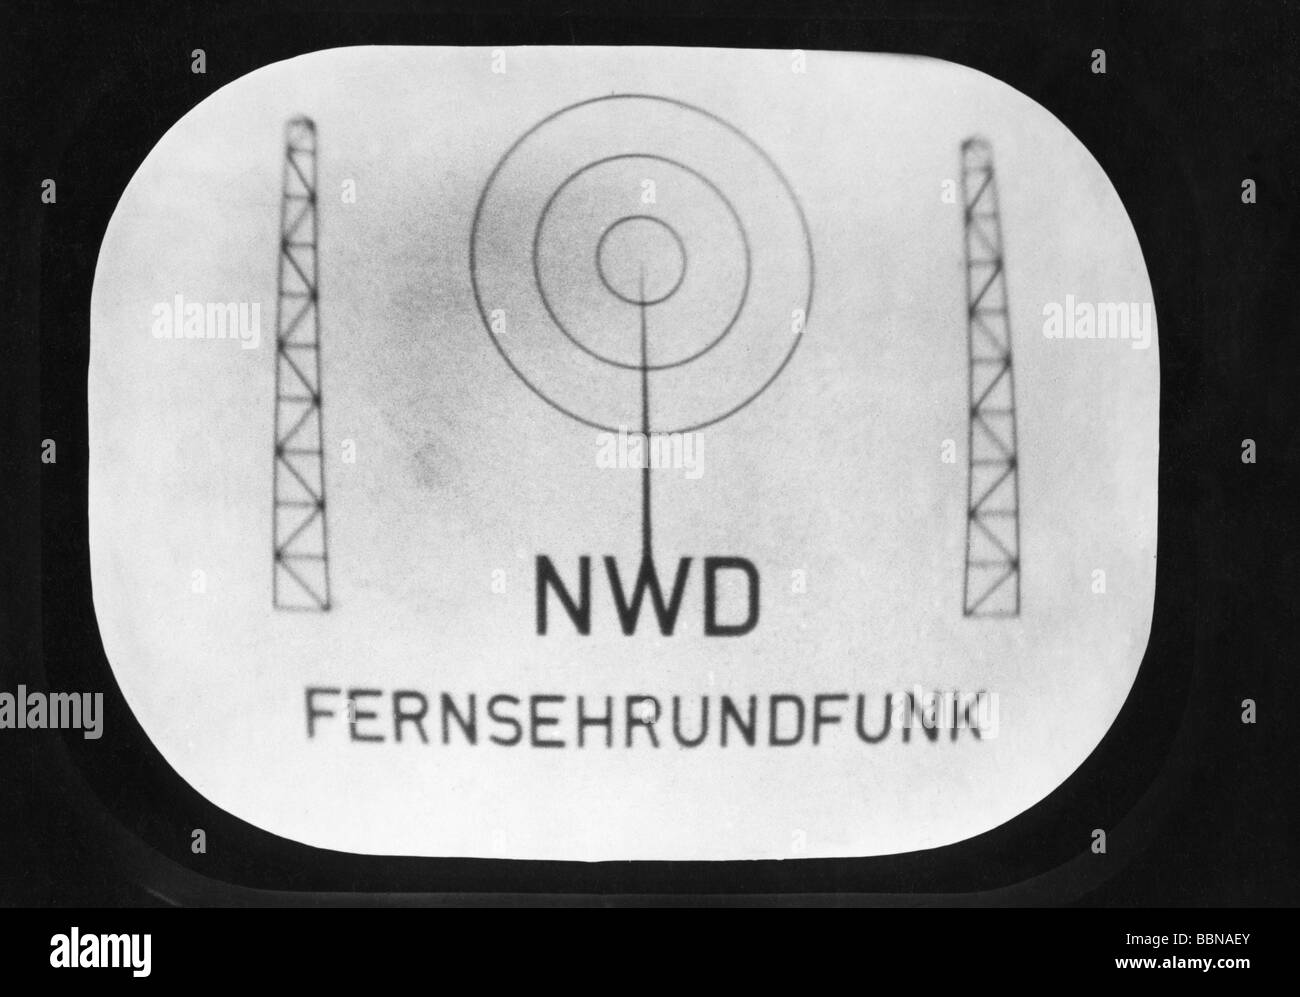 broadcast, television, special announcement sign, Nordwestdeutscher Rundfunk (Northwest German Broadcasting, NWDR), circa 1952, Stock Photo